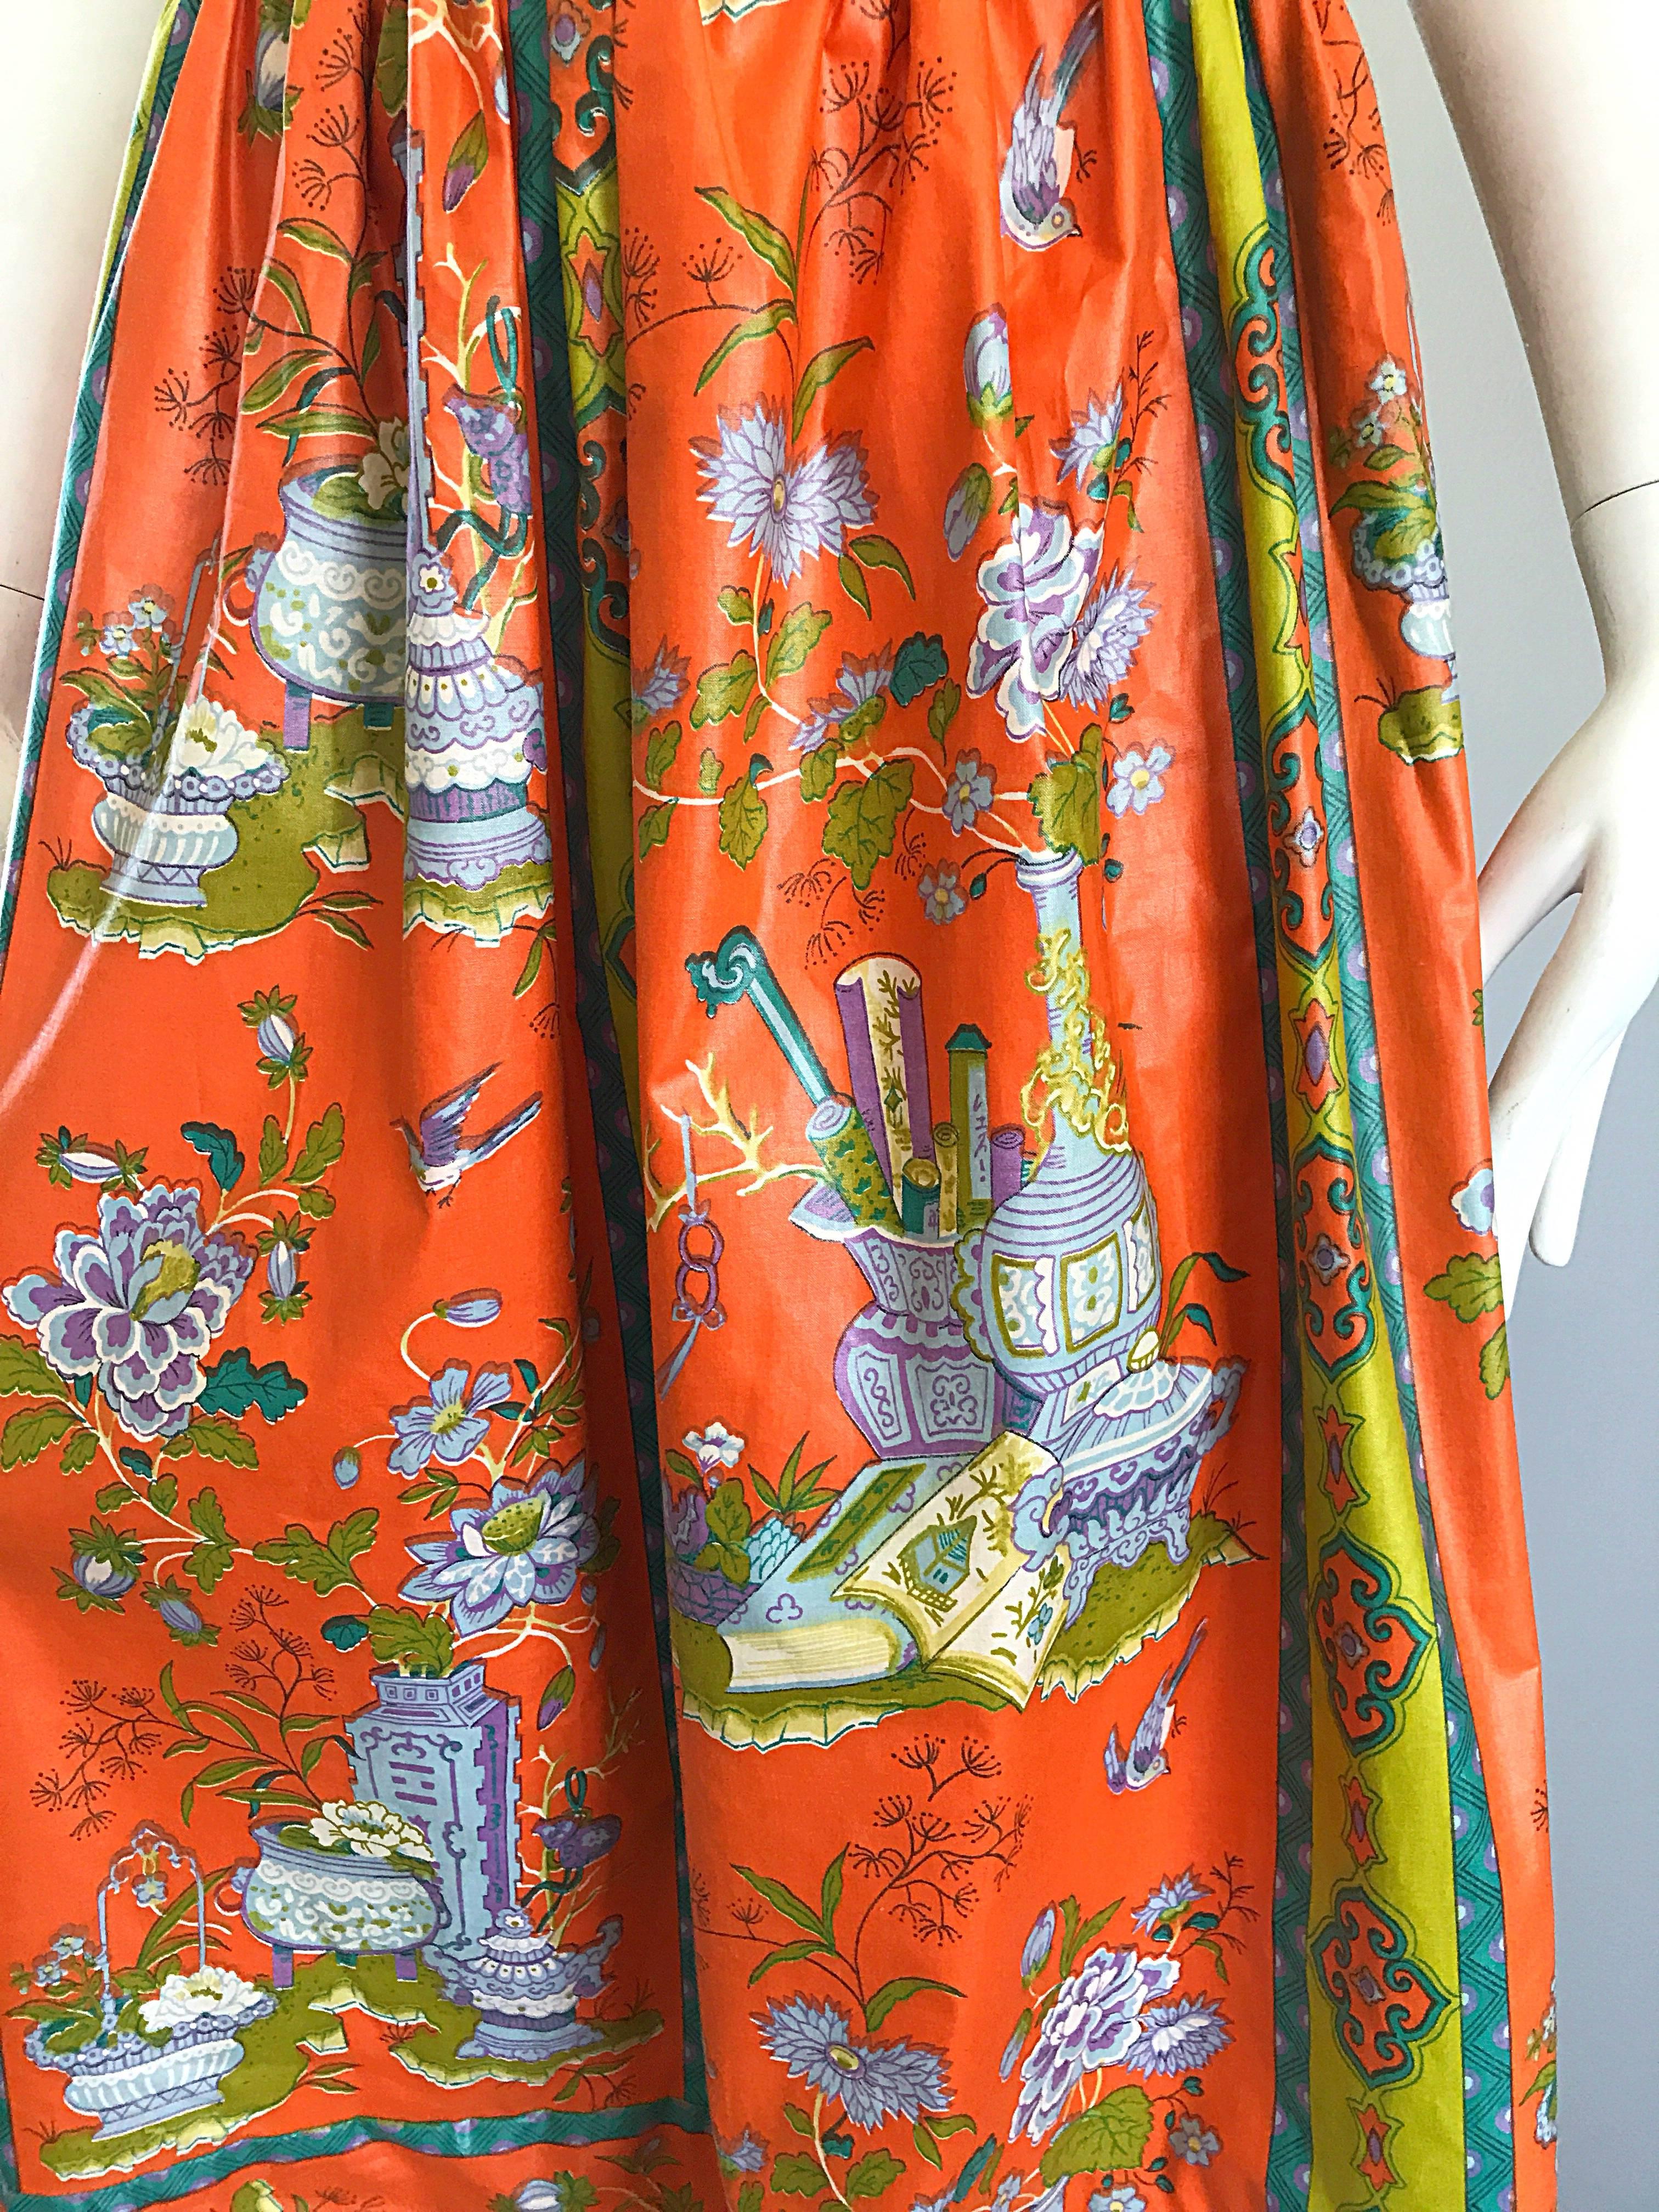 Rare early 1970s maxi skirt by MISS RIKKI FOR SPORT-TRIO! This label was worn by fashion icons of the 60s and 70s, including Jackie Kennedy ( Jackie O ) ! This gem features an array of fun prints throughout. Soft waxed cotton holds shape nicely.